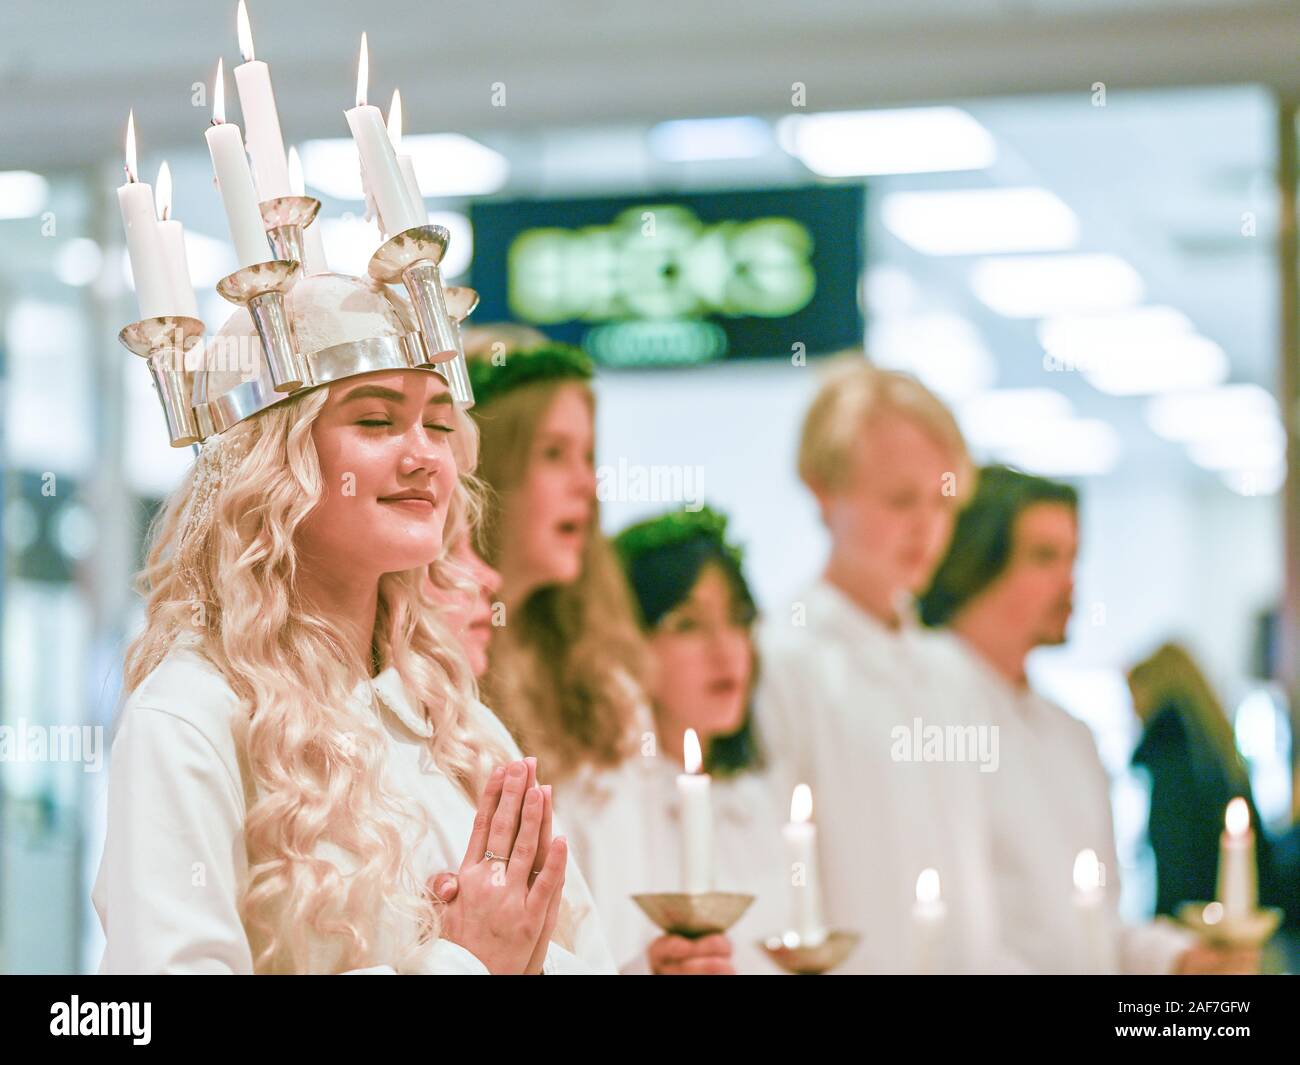 Traditional celebration of Saint Lucy in Sweden. Norrkoping’s Lucia 2019 Izabella Swartz singing carols in shopping mall Linden. Stock Photo